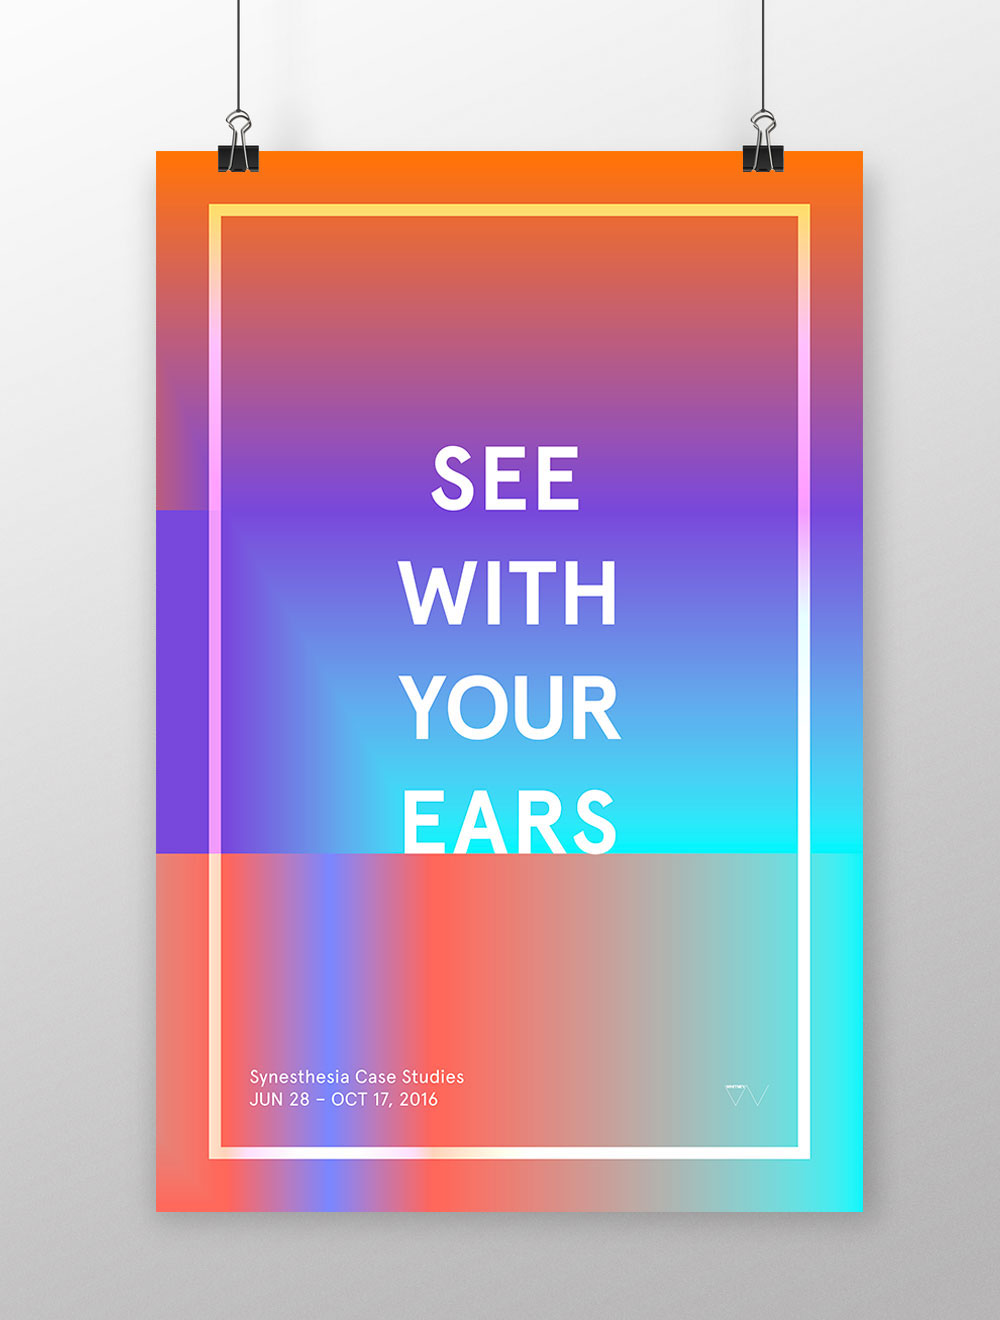 See With Your Ears 色彩的视觉通感